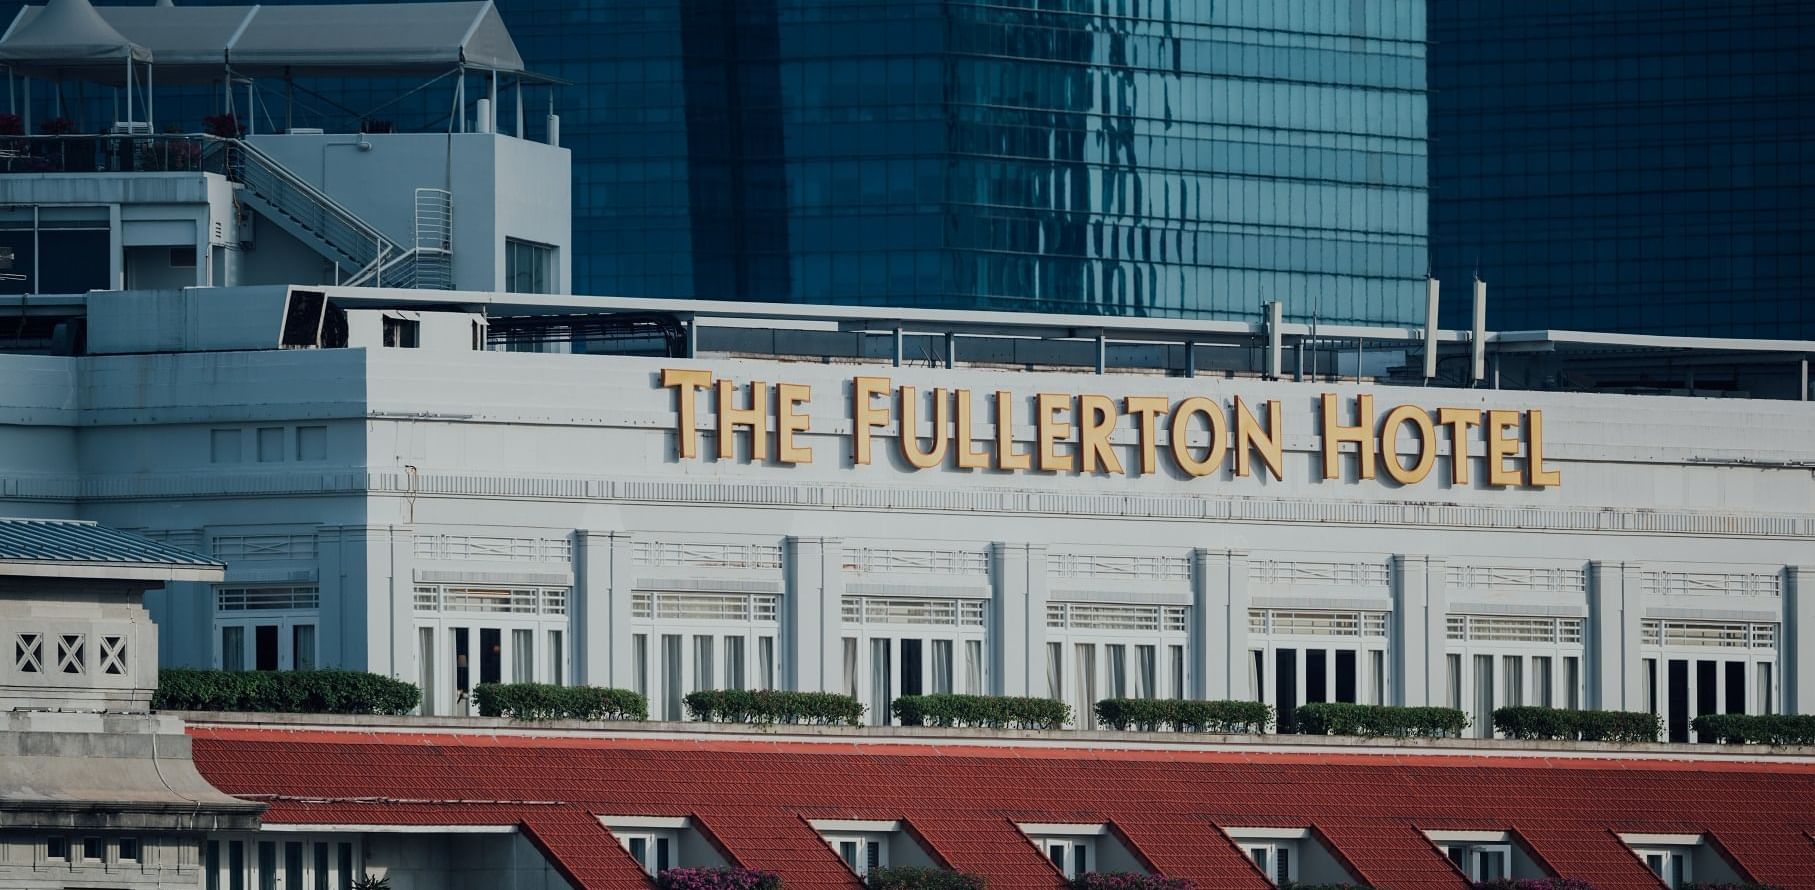 Facade of the name board of The Fullerton Hotel